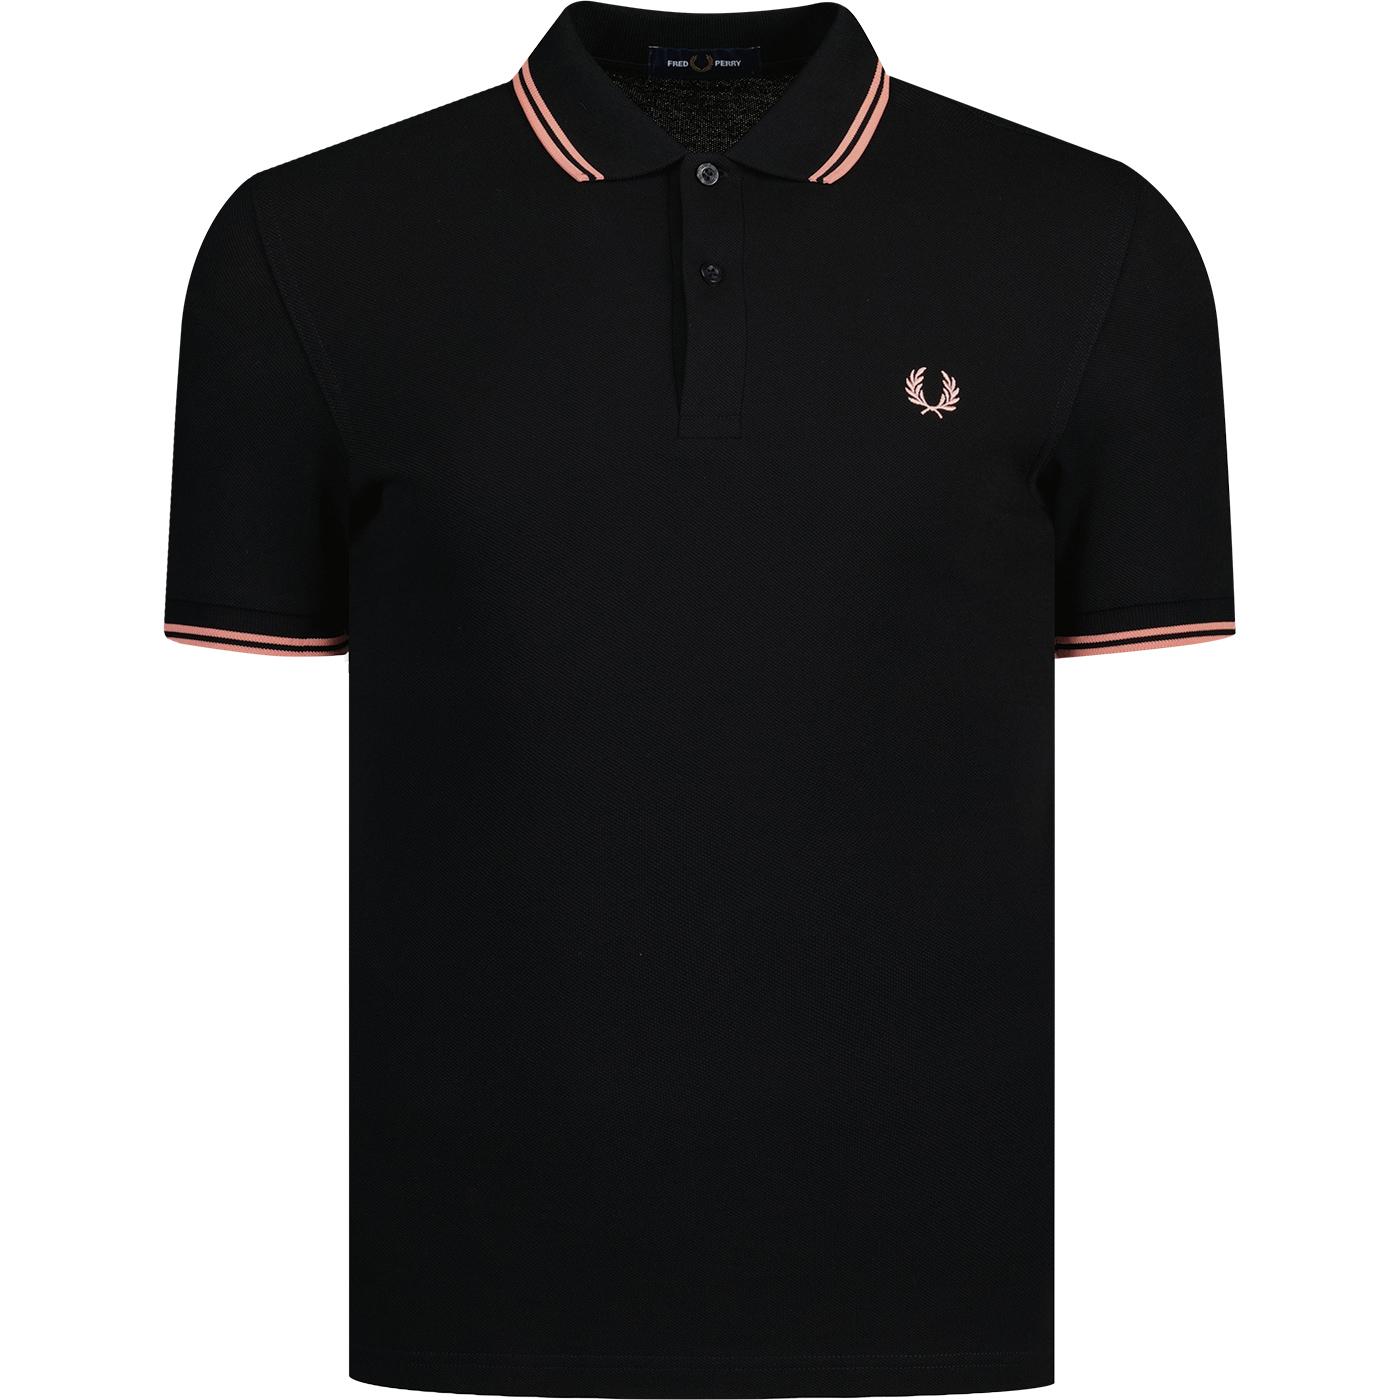 FRED PERRY M3600 Twin Tipped Mod Polo - Black/Pink